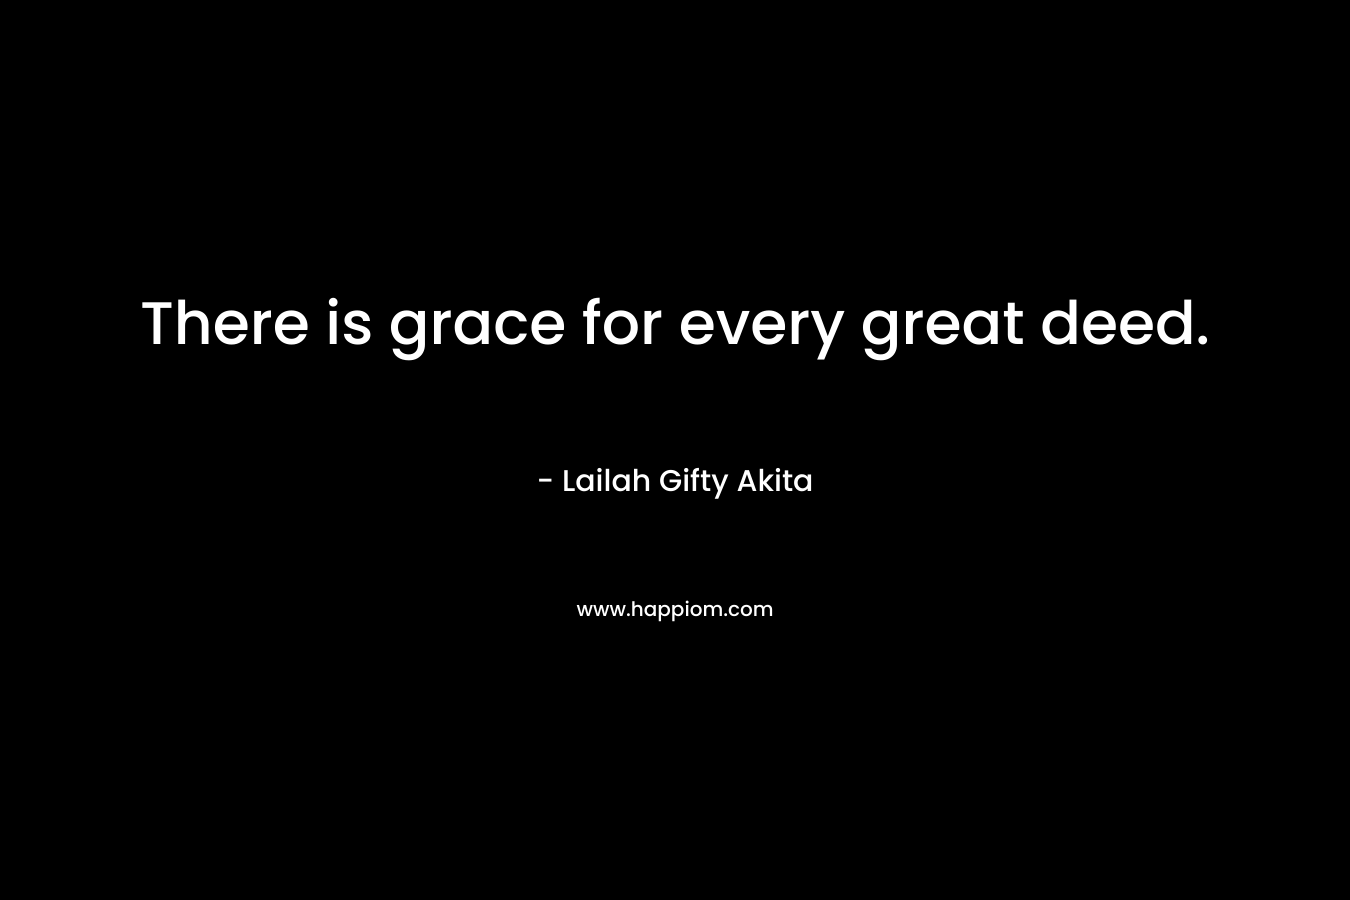 There is grace for every great deed.